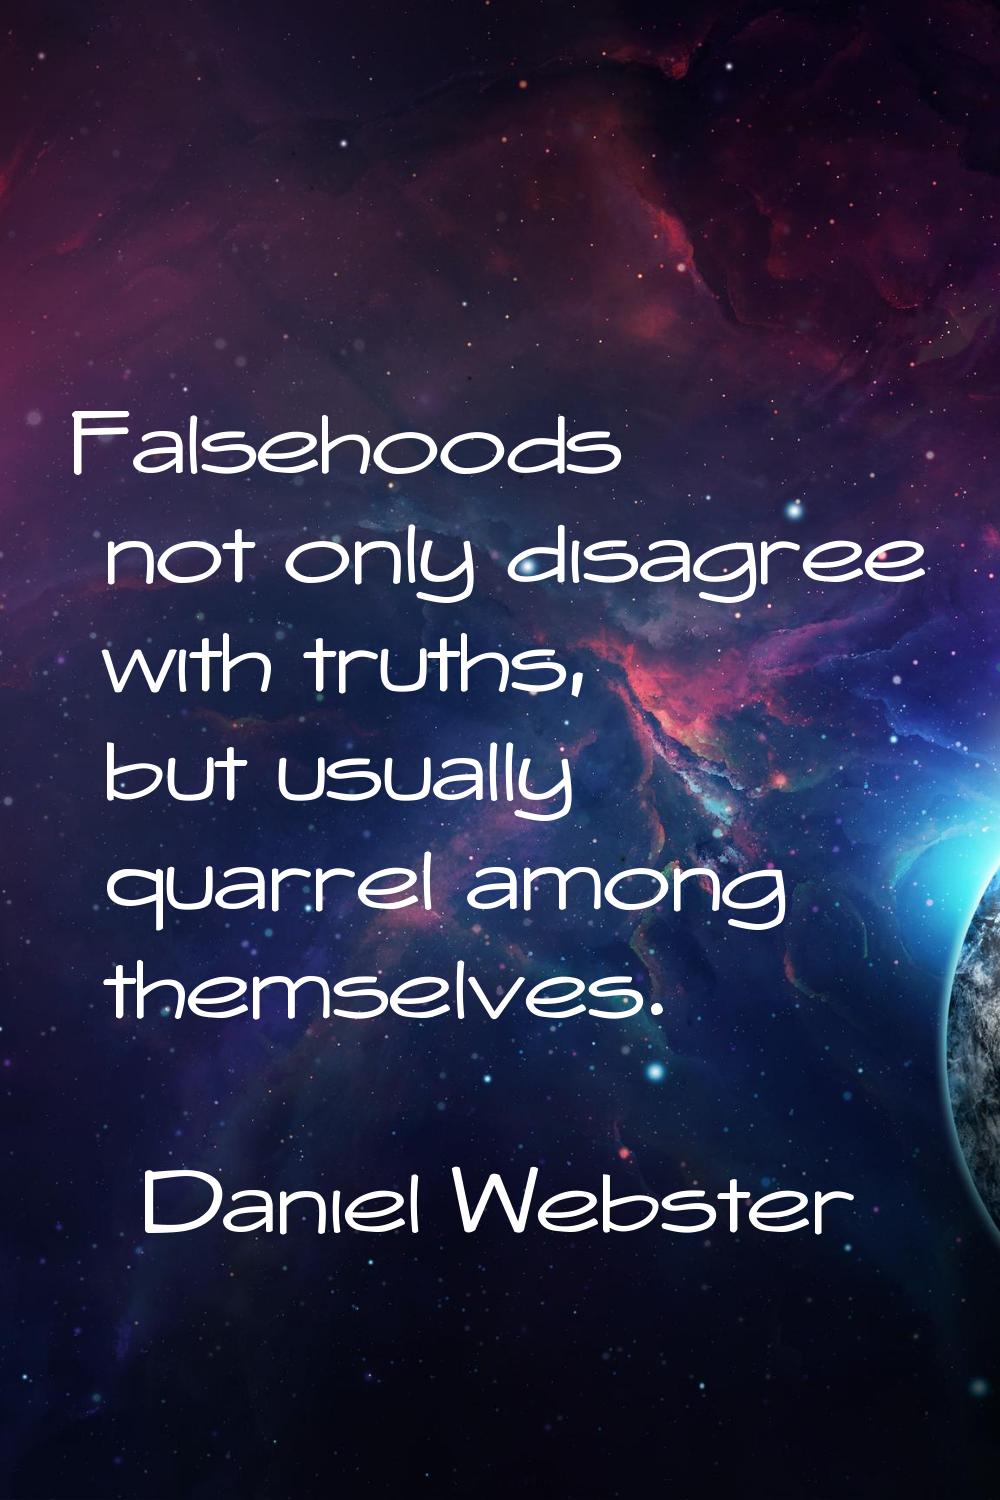 Falsehoods not only disagree with truths, but usually quarrel among themselves.